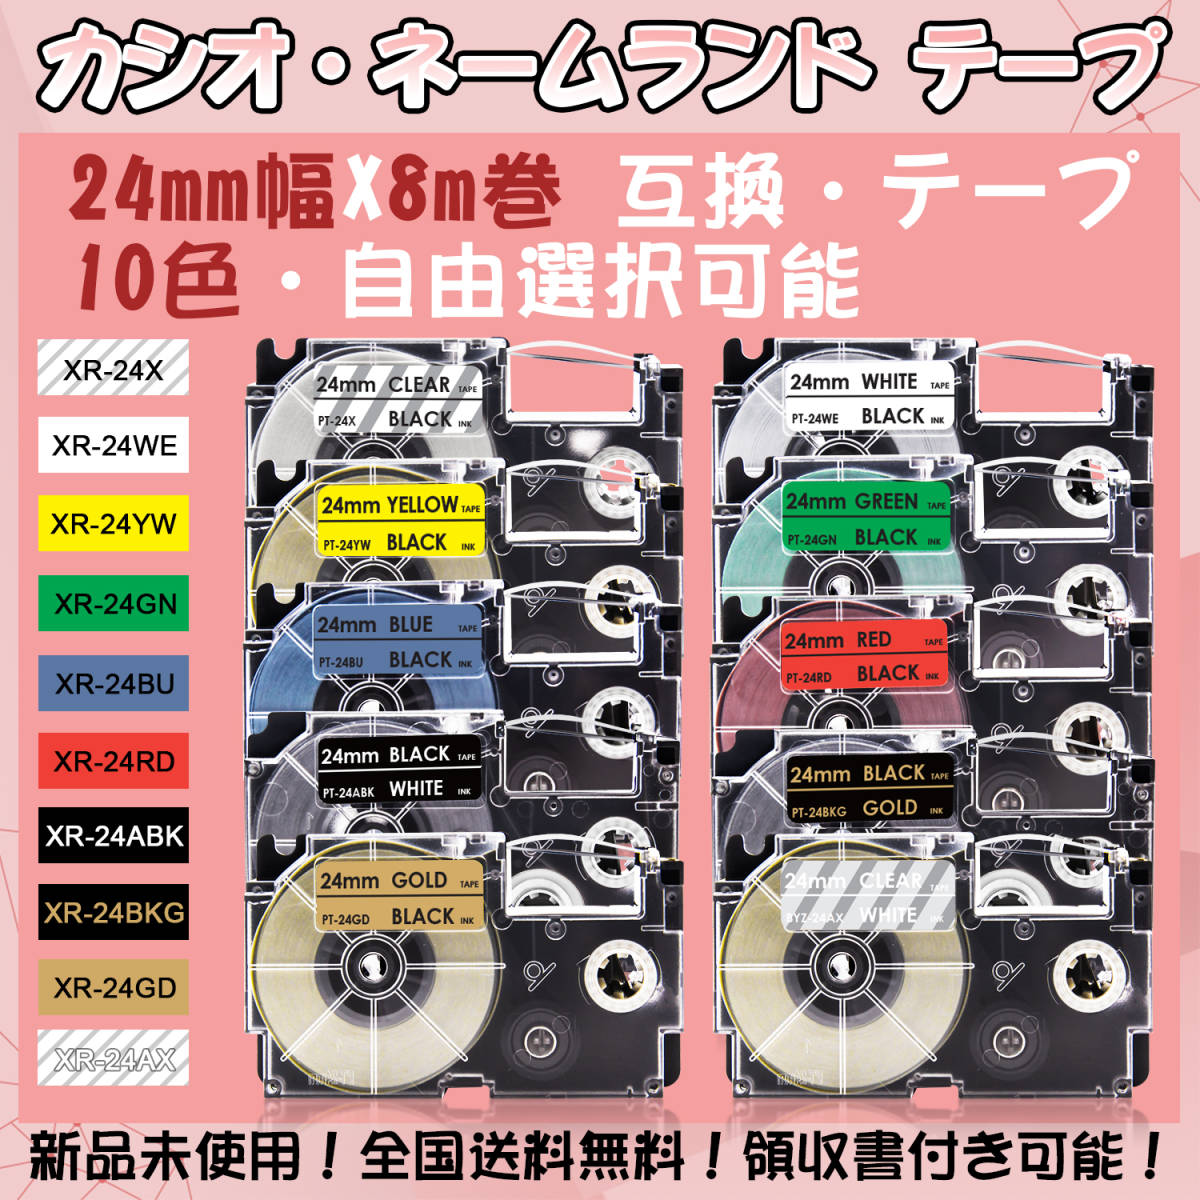  Casio 24mm width X8m volume *10 сolor selection possible name Land interchangeable tape 4 piece 